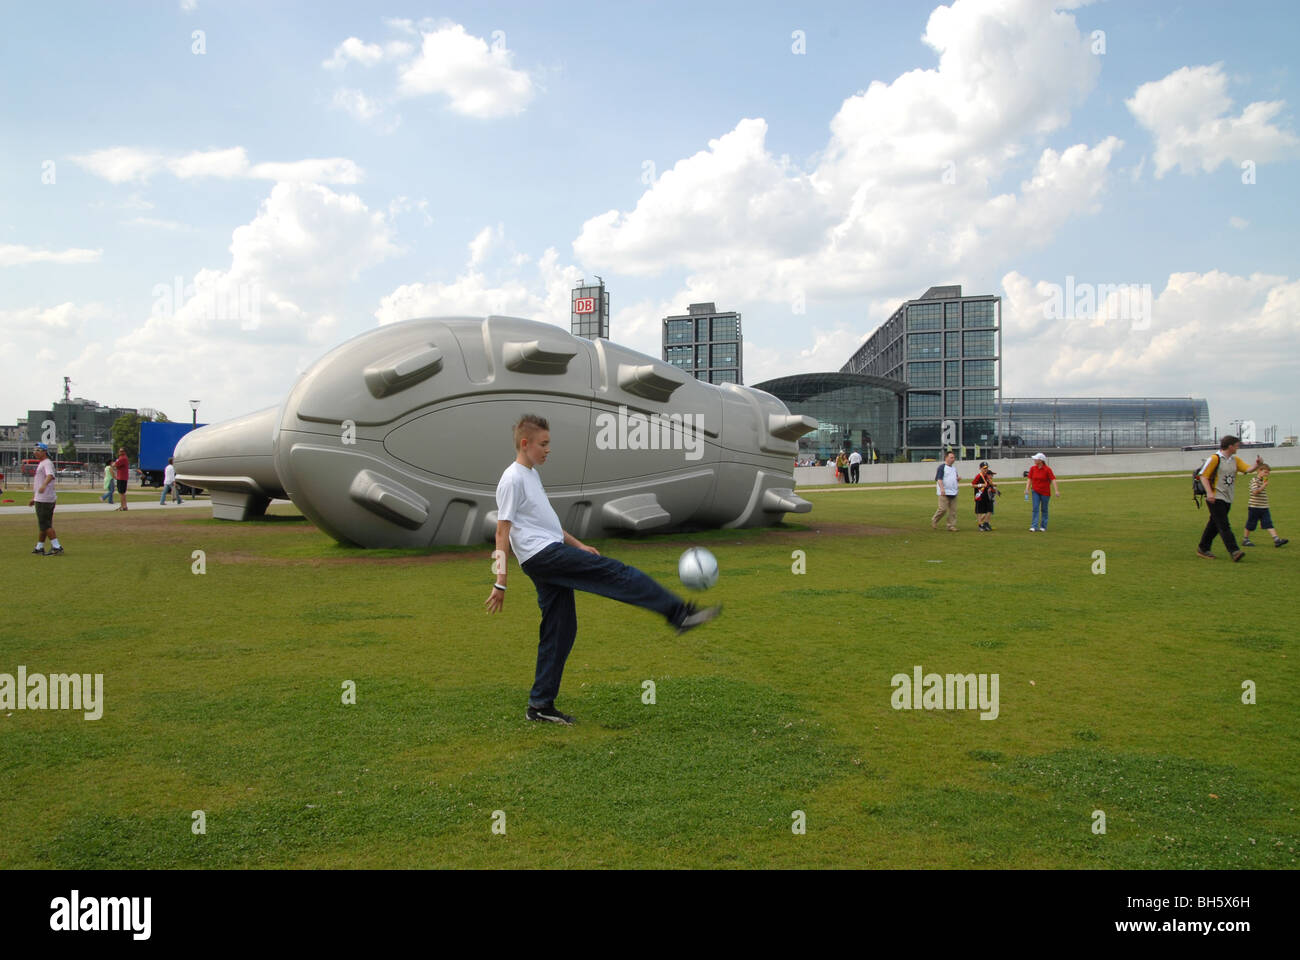 Germany. Youth kicking ball by giant football boot during World Cup 2006 in Berlin Stock Photo